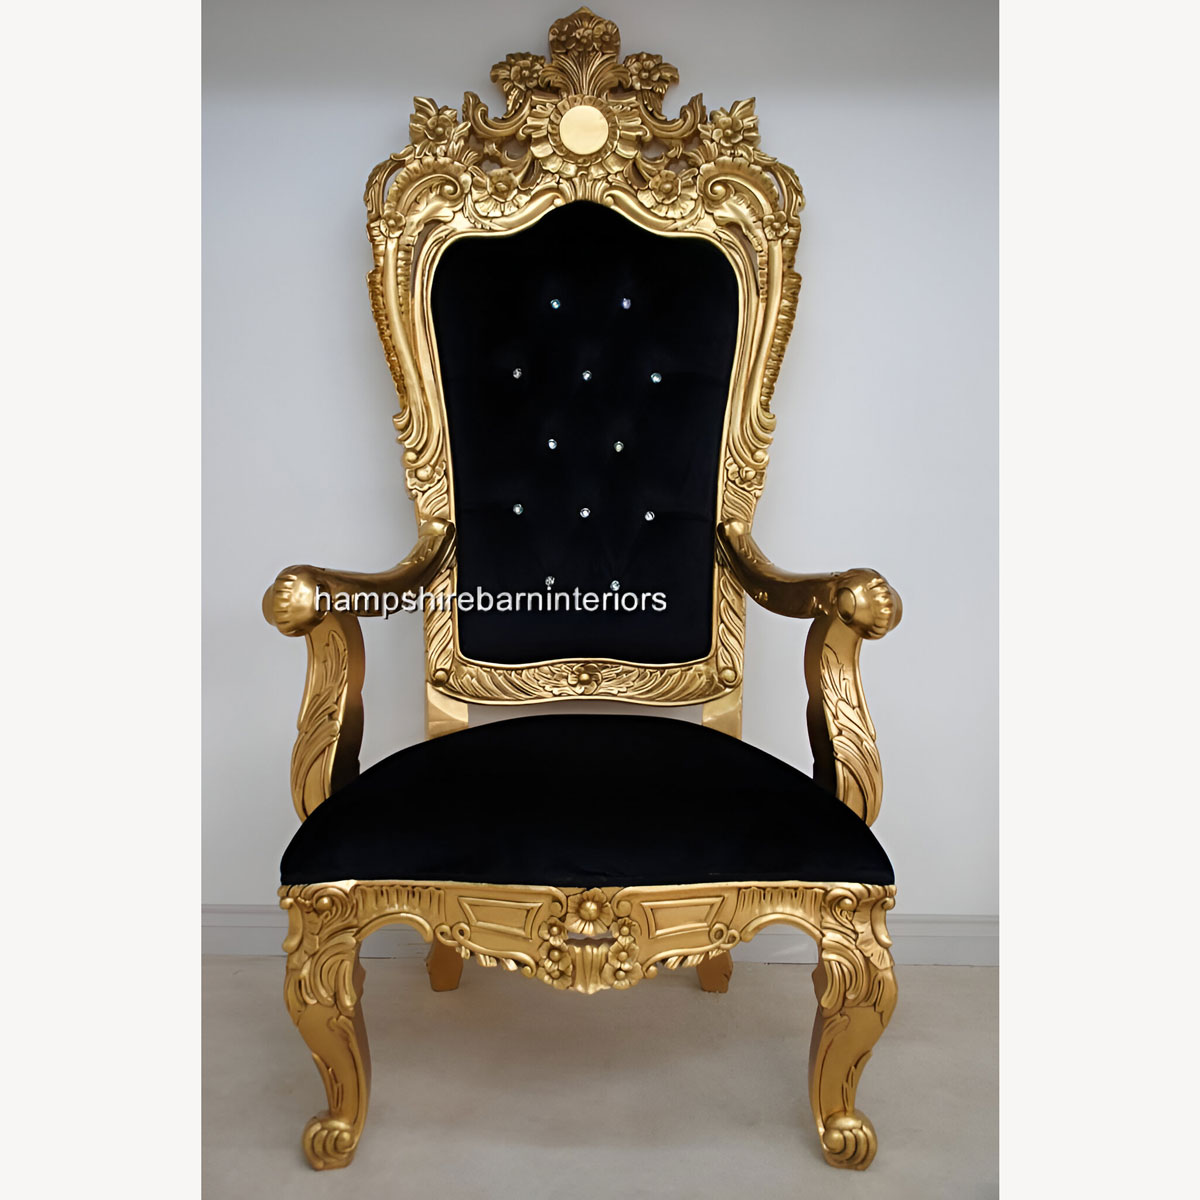 A Beautiful Emperor Rose Large Ornate Throne Chair Shown In Gold Leaf And With Crystal Diamond Buttons 2 - Hampshire Barn Interiors - A Beautiful Emperor Rose Large Ornate Throne Chair Shown In Gold Leaf And With Crystal Diamond Buttons -